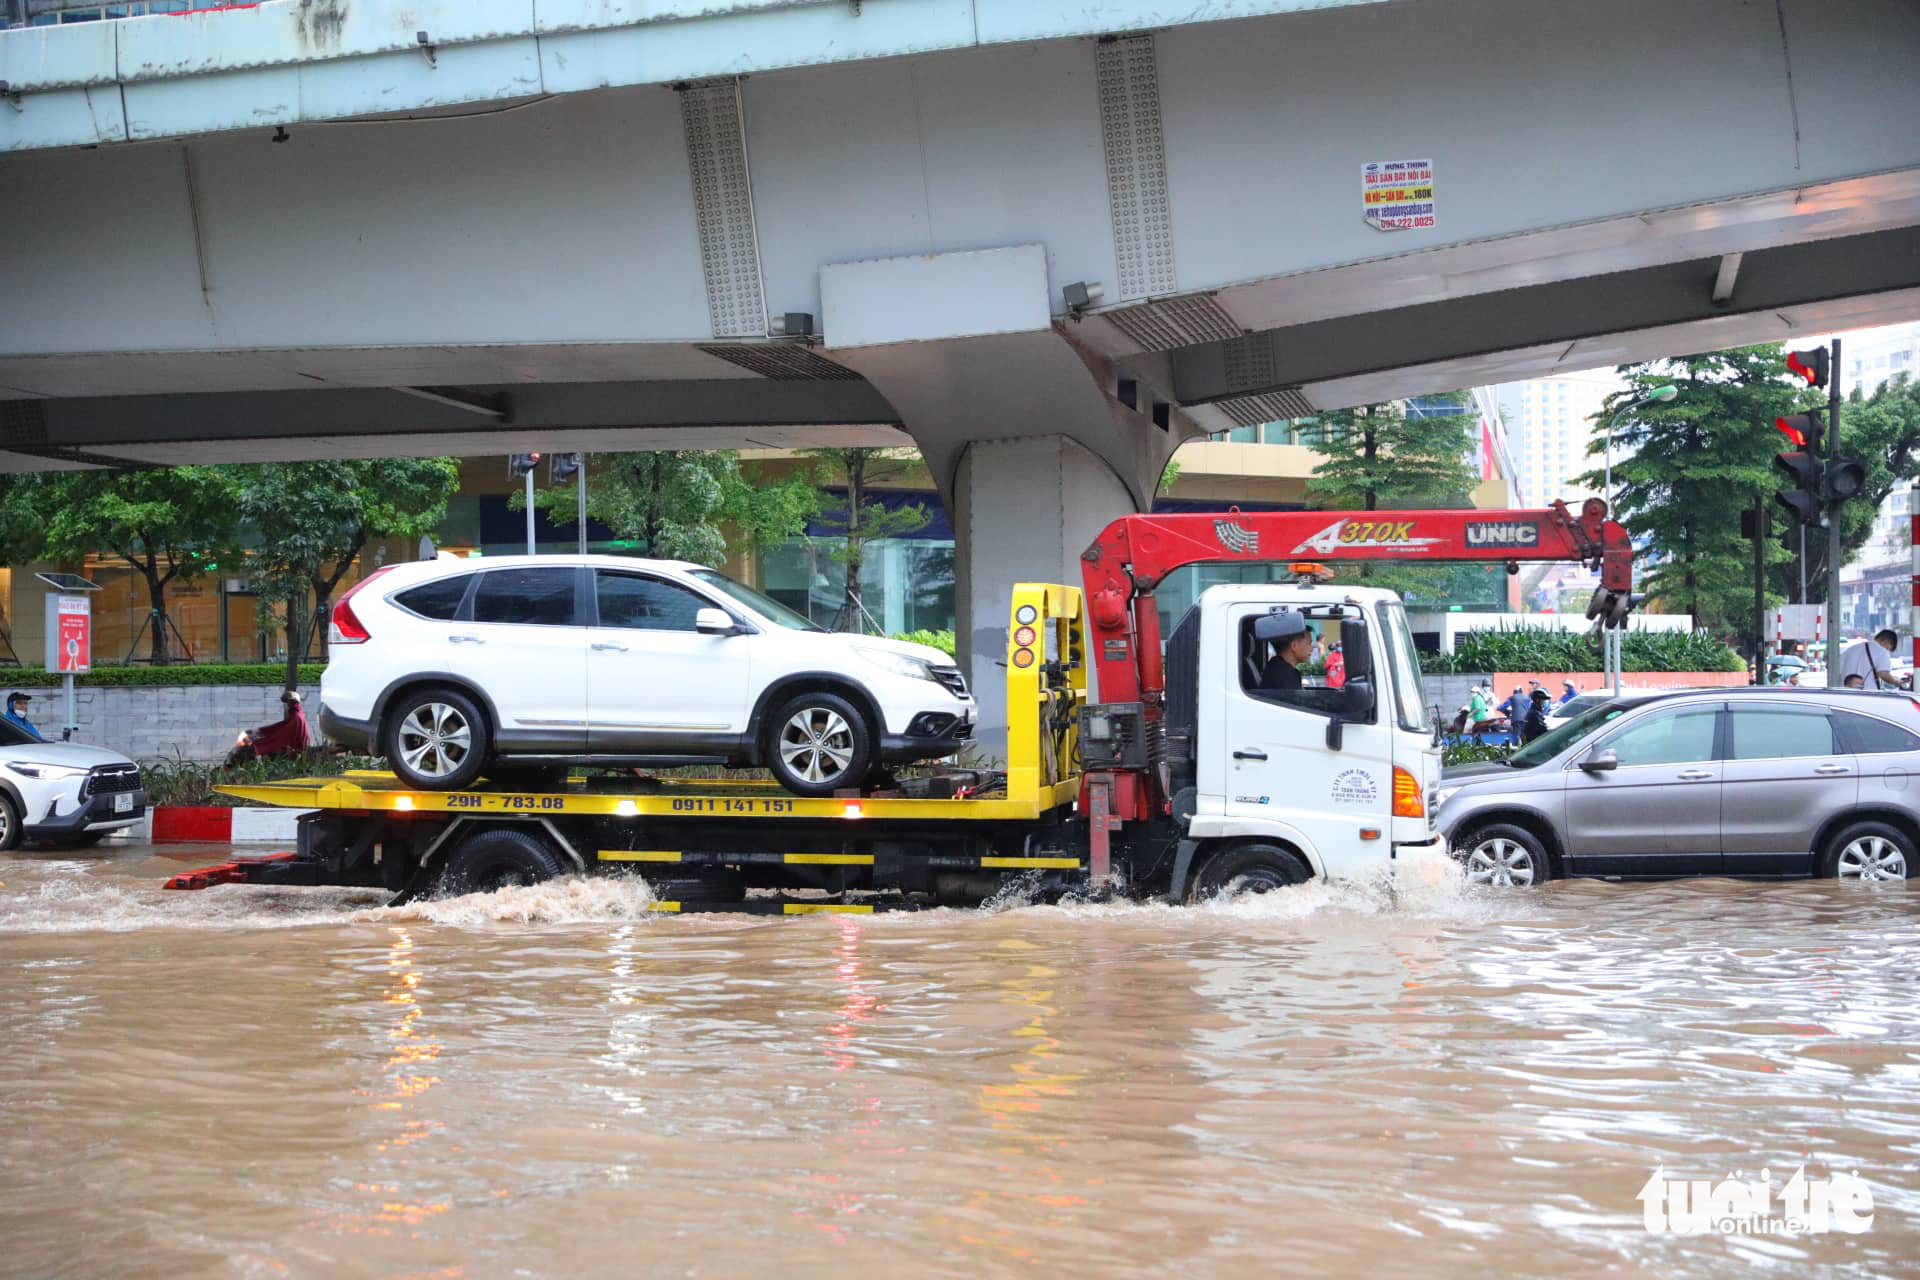 A tow truck transports a stalled car through a flooded street in Hanoi, May 29, 2022. Photo: Danh Khang / Tuoi Tre